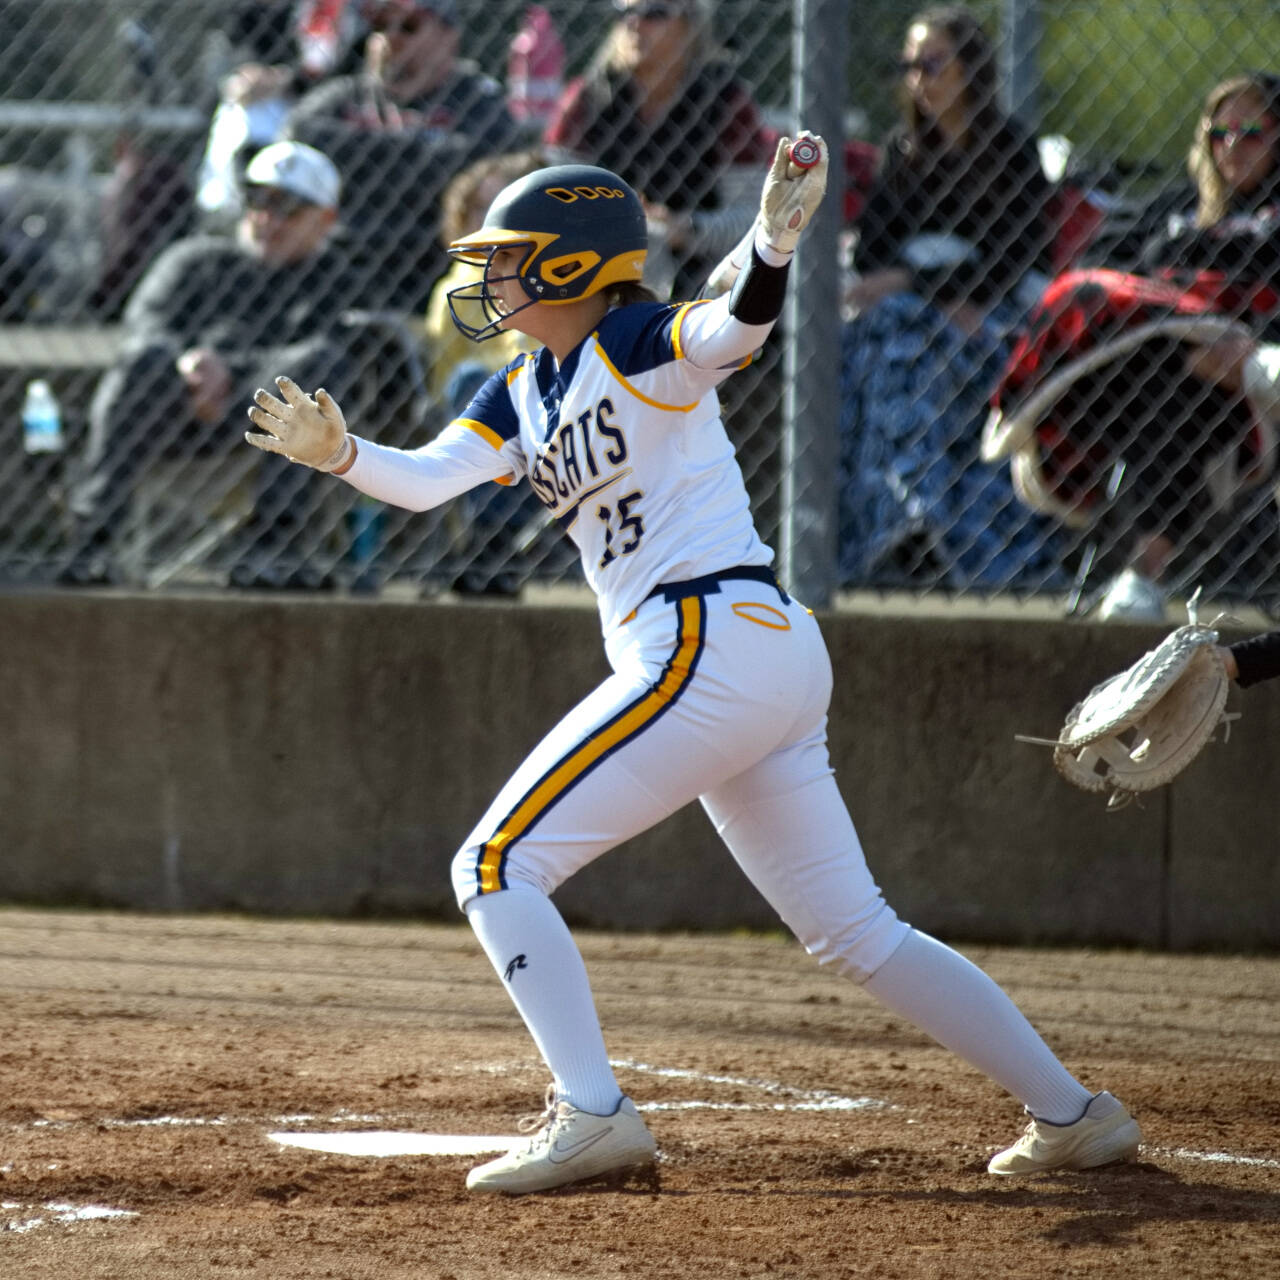 DAILY WORLD FILE PHOTO Aberdeen outfielder Merryn Bruner, seen here in a file photo, hit two home runs and had five RBI in a 15-5 mercy-rule victory over Columbia River in the 1A District 4 Tournament on Thursday.